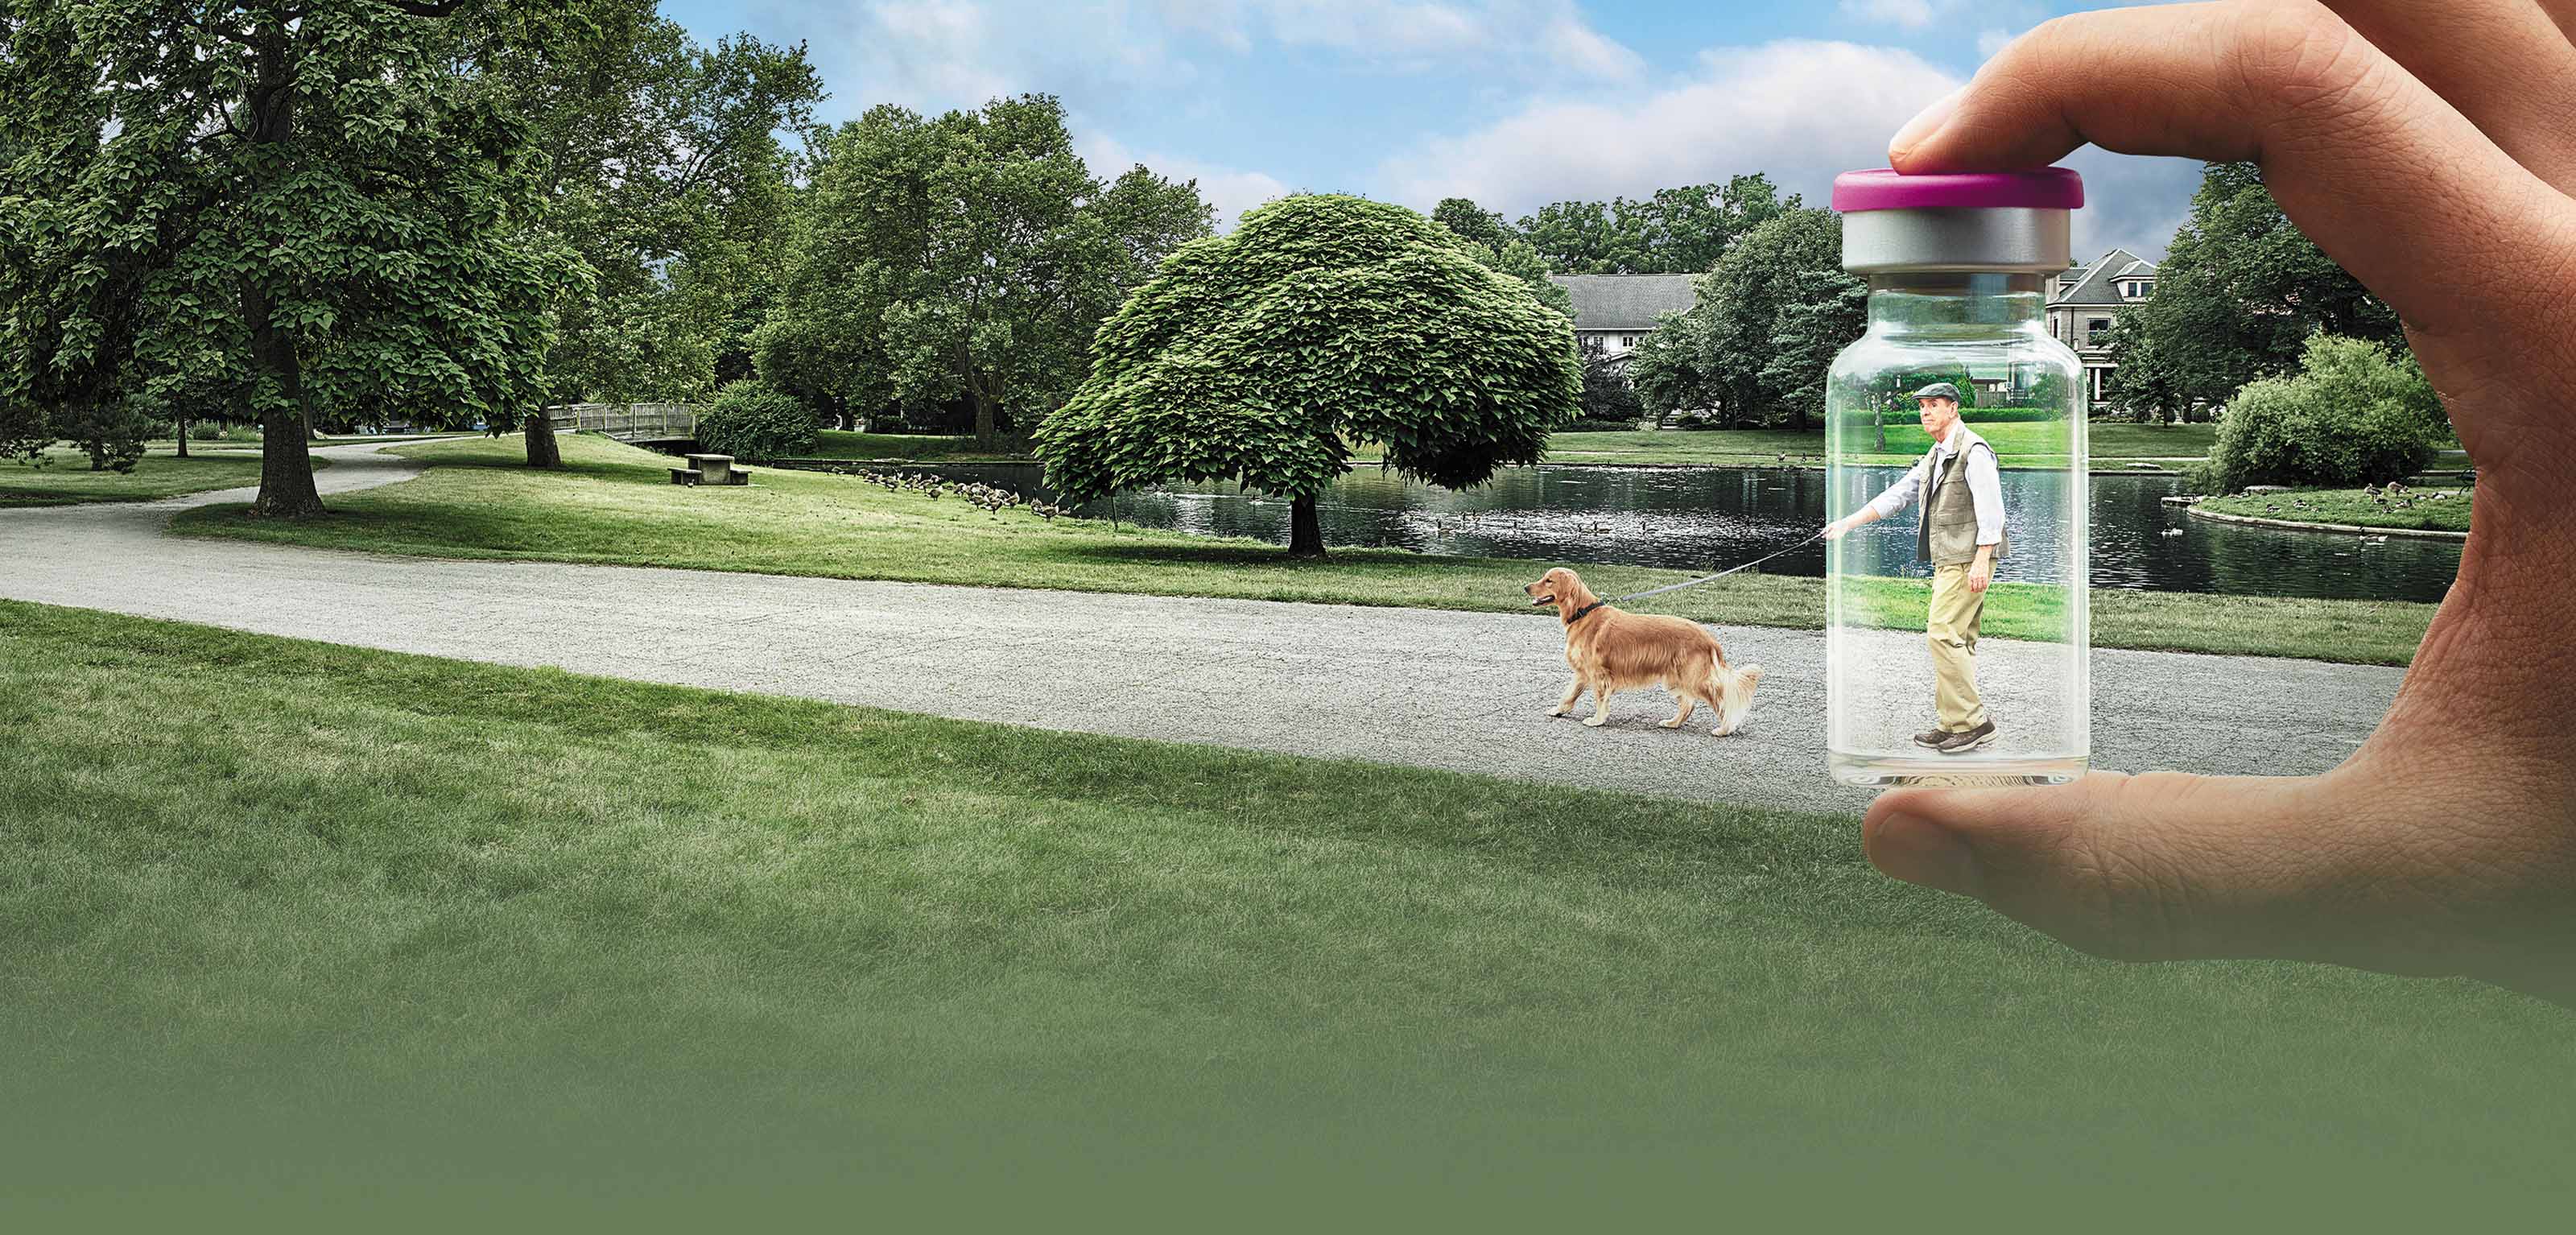 Cutaneous squamous cell carcinoma ad campaign for Libtayo. Image of a man walking a dog in a park